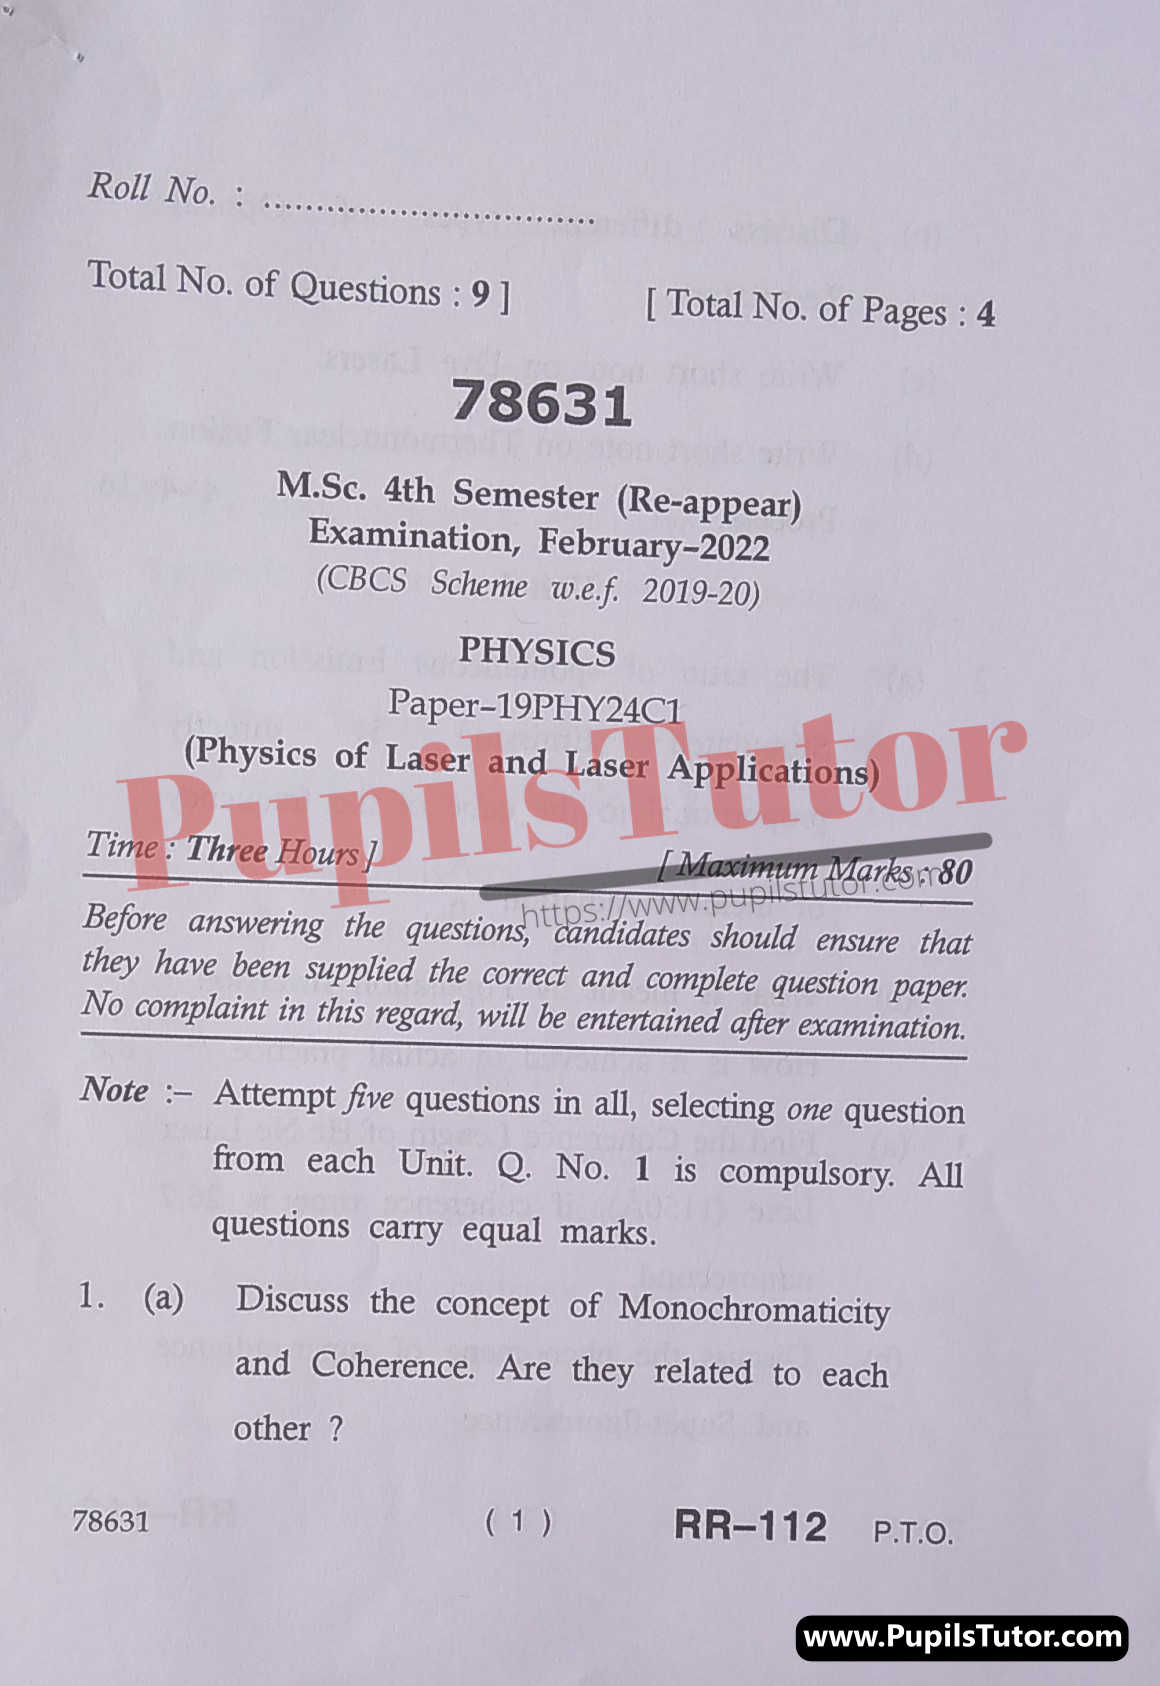 MDU (Maharshi Dayanand University, Rohtak Haryana) MSc Physics CBCS Scheme Fourth Semester Previous Year Physics Of Laser And Laser Applications Question Paper For February, 2022 Exam (Question Paper Page 1) - pupilstutor.com